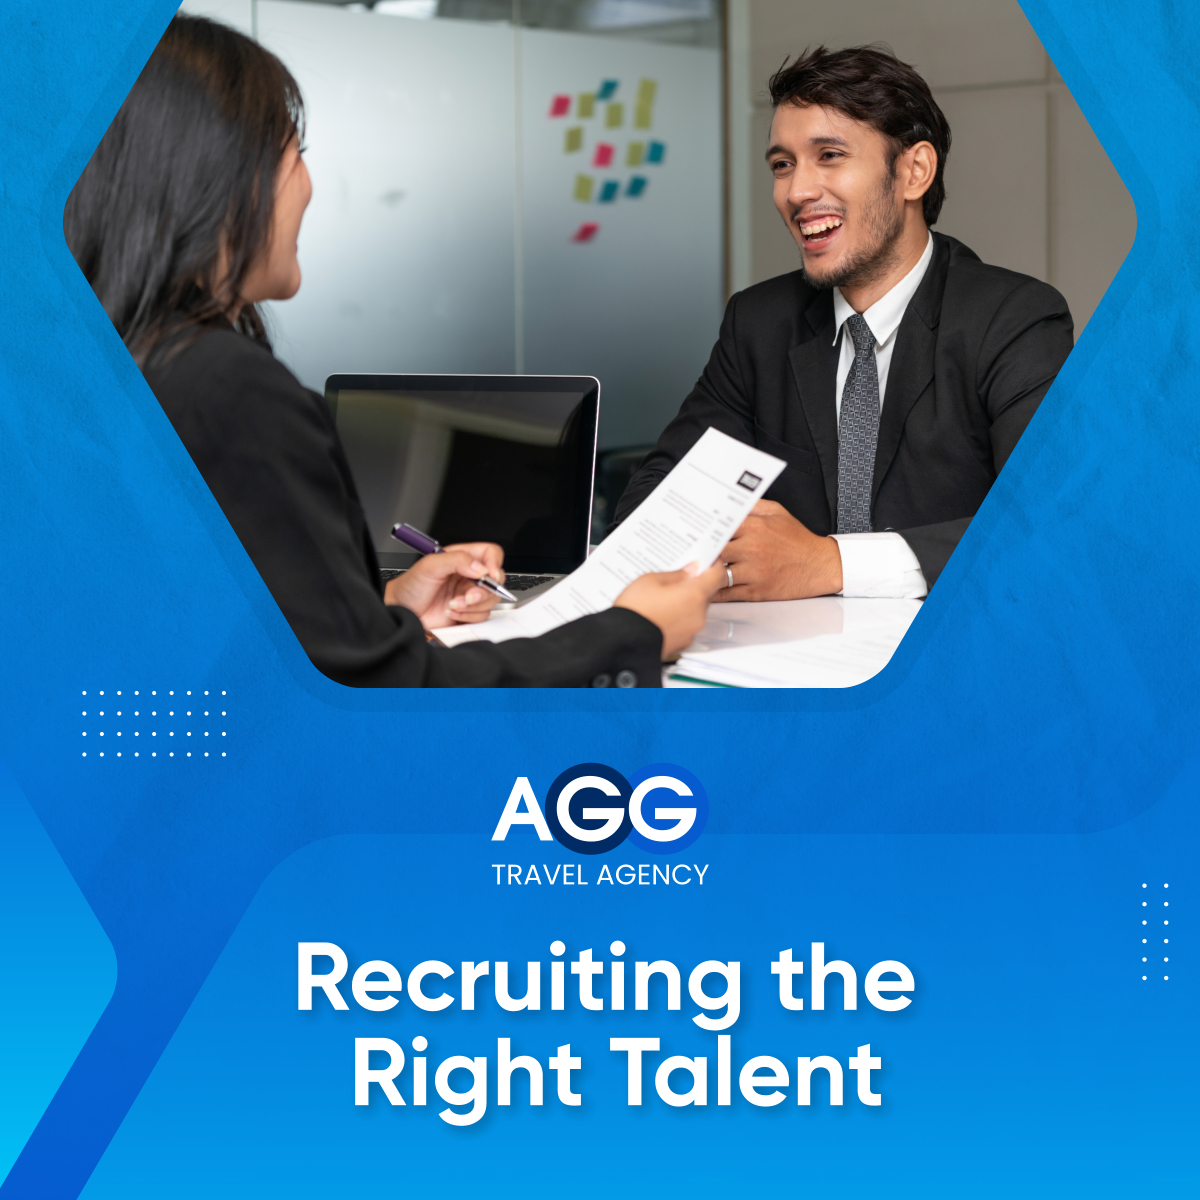 We specialize in finding the right talent for your business. We understand that hiring is one of the most important decisions you'll make for your company. And we're here to help you find the best candidates for your needs.

#RightTalent #FargoND #StaffingSolutions